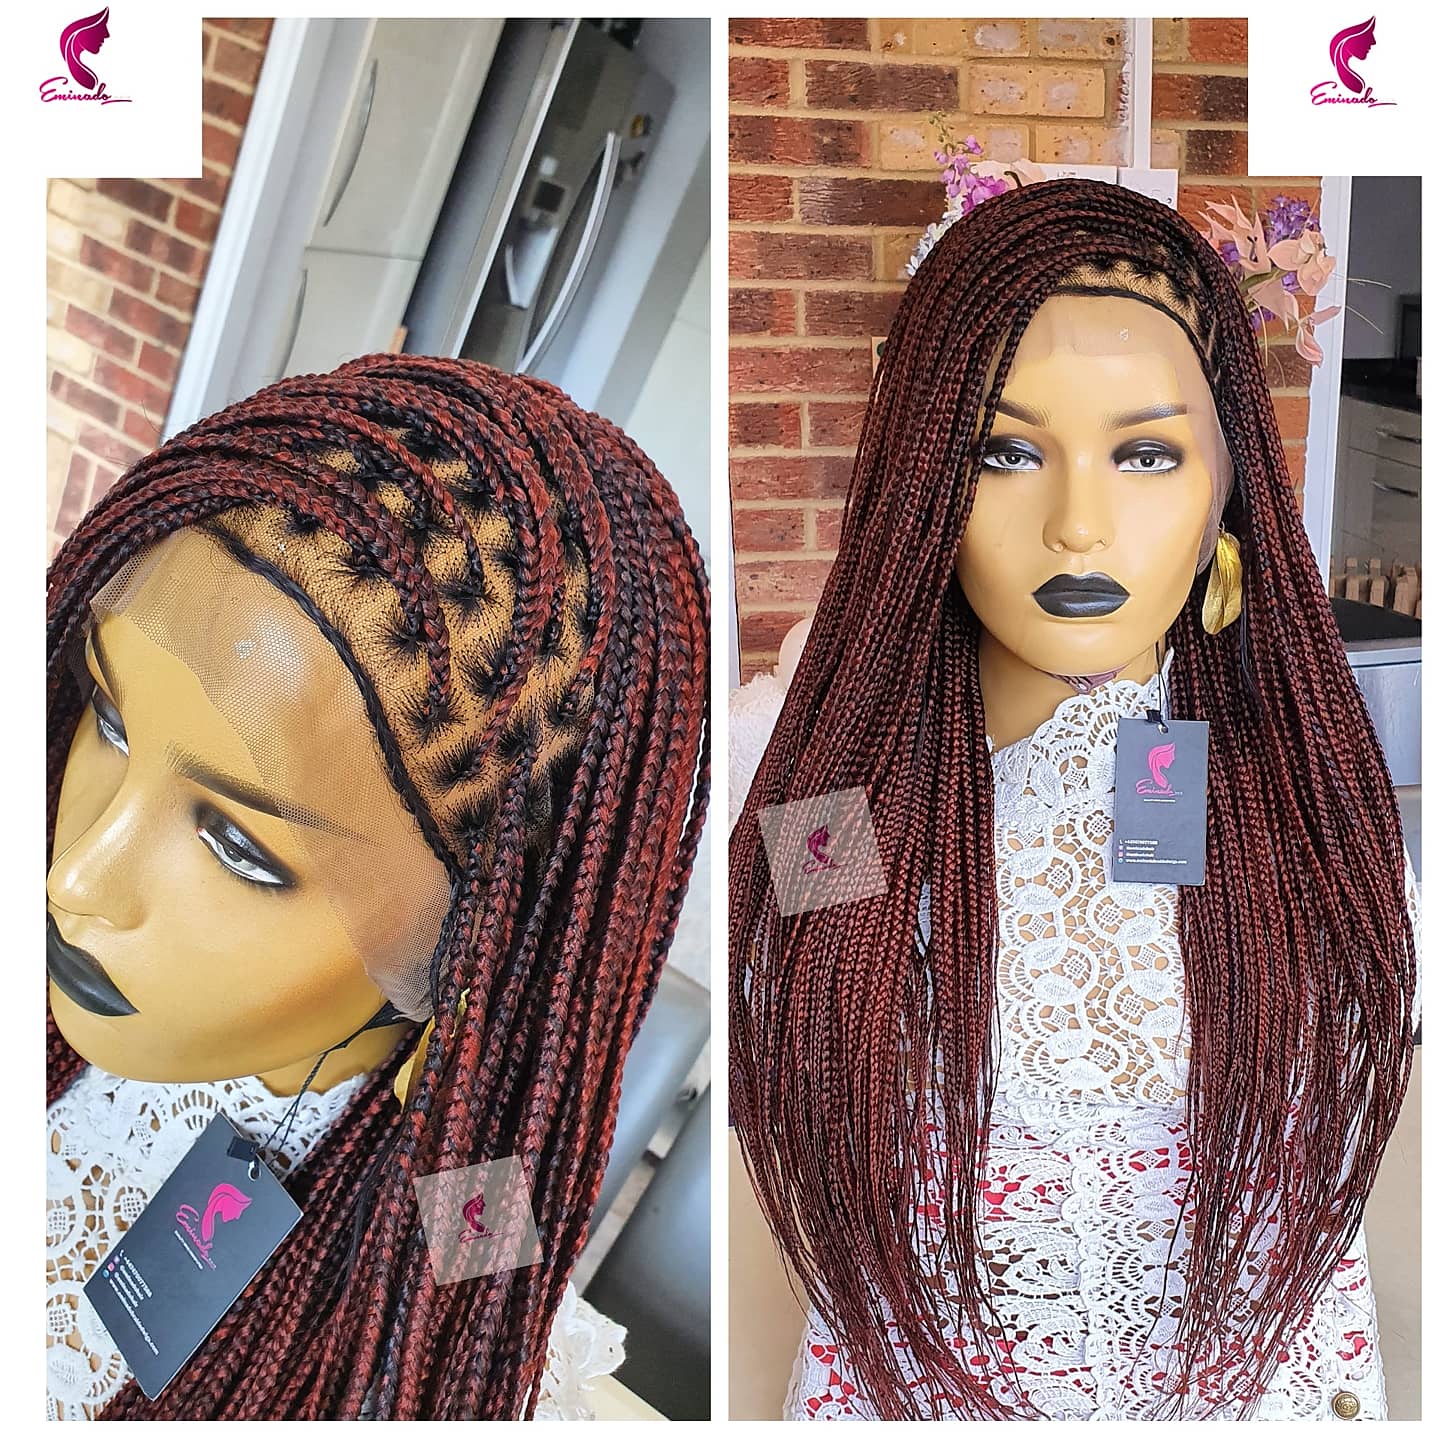 Burgundy Braided Lace Front Wigs for Women Synthetic Box Braids